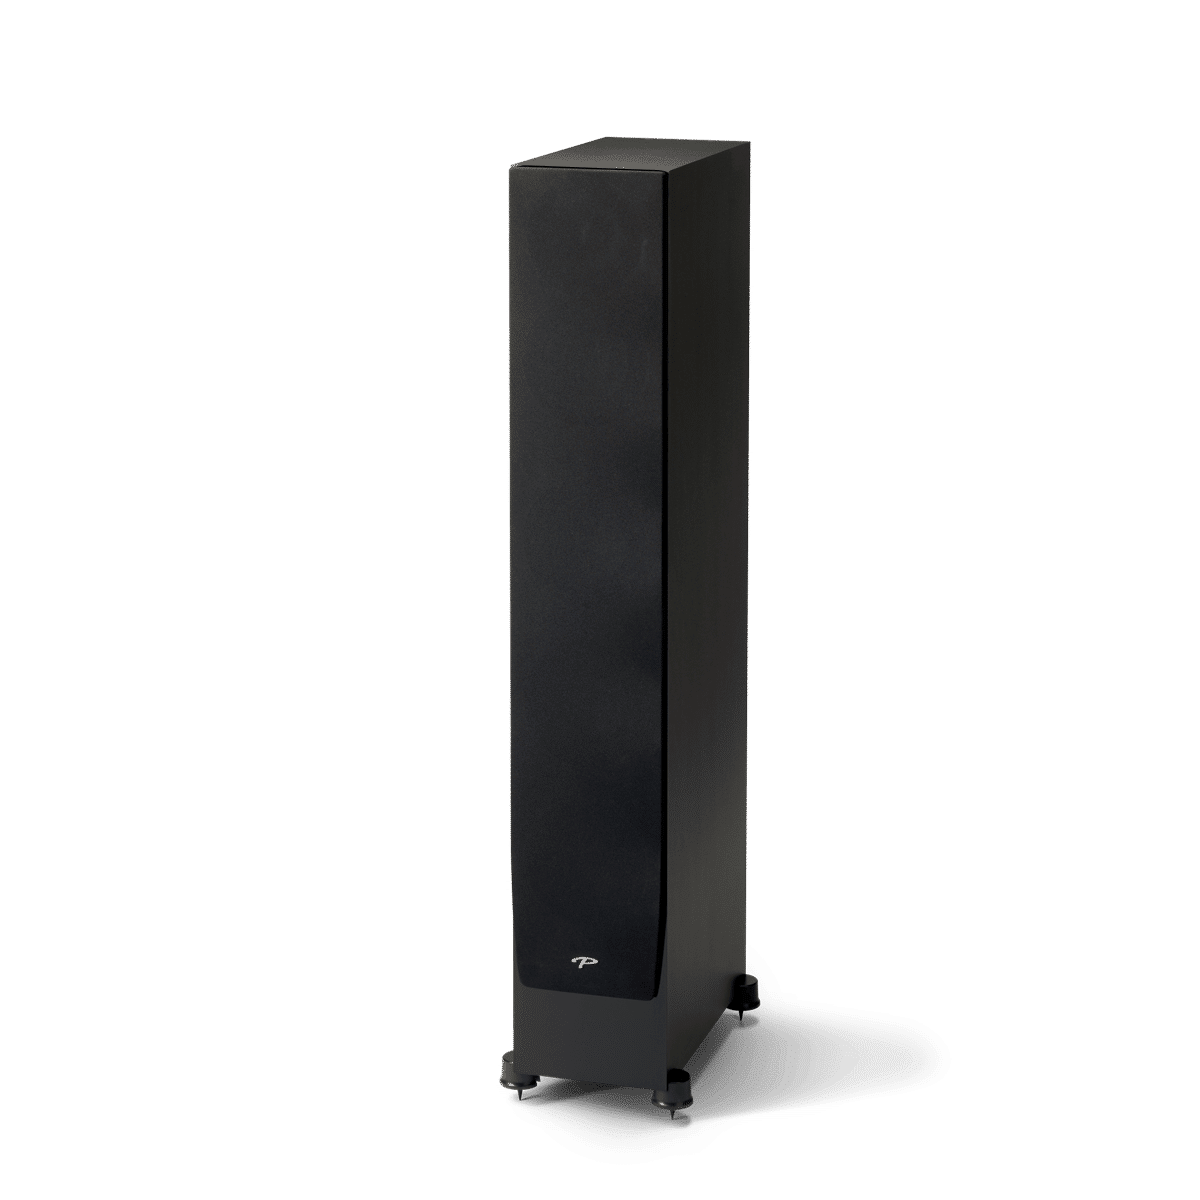 Paradigm Monitor SE 6000f Floor Standing Speakers black with grill